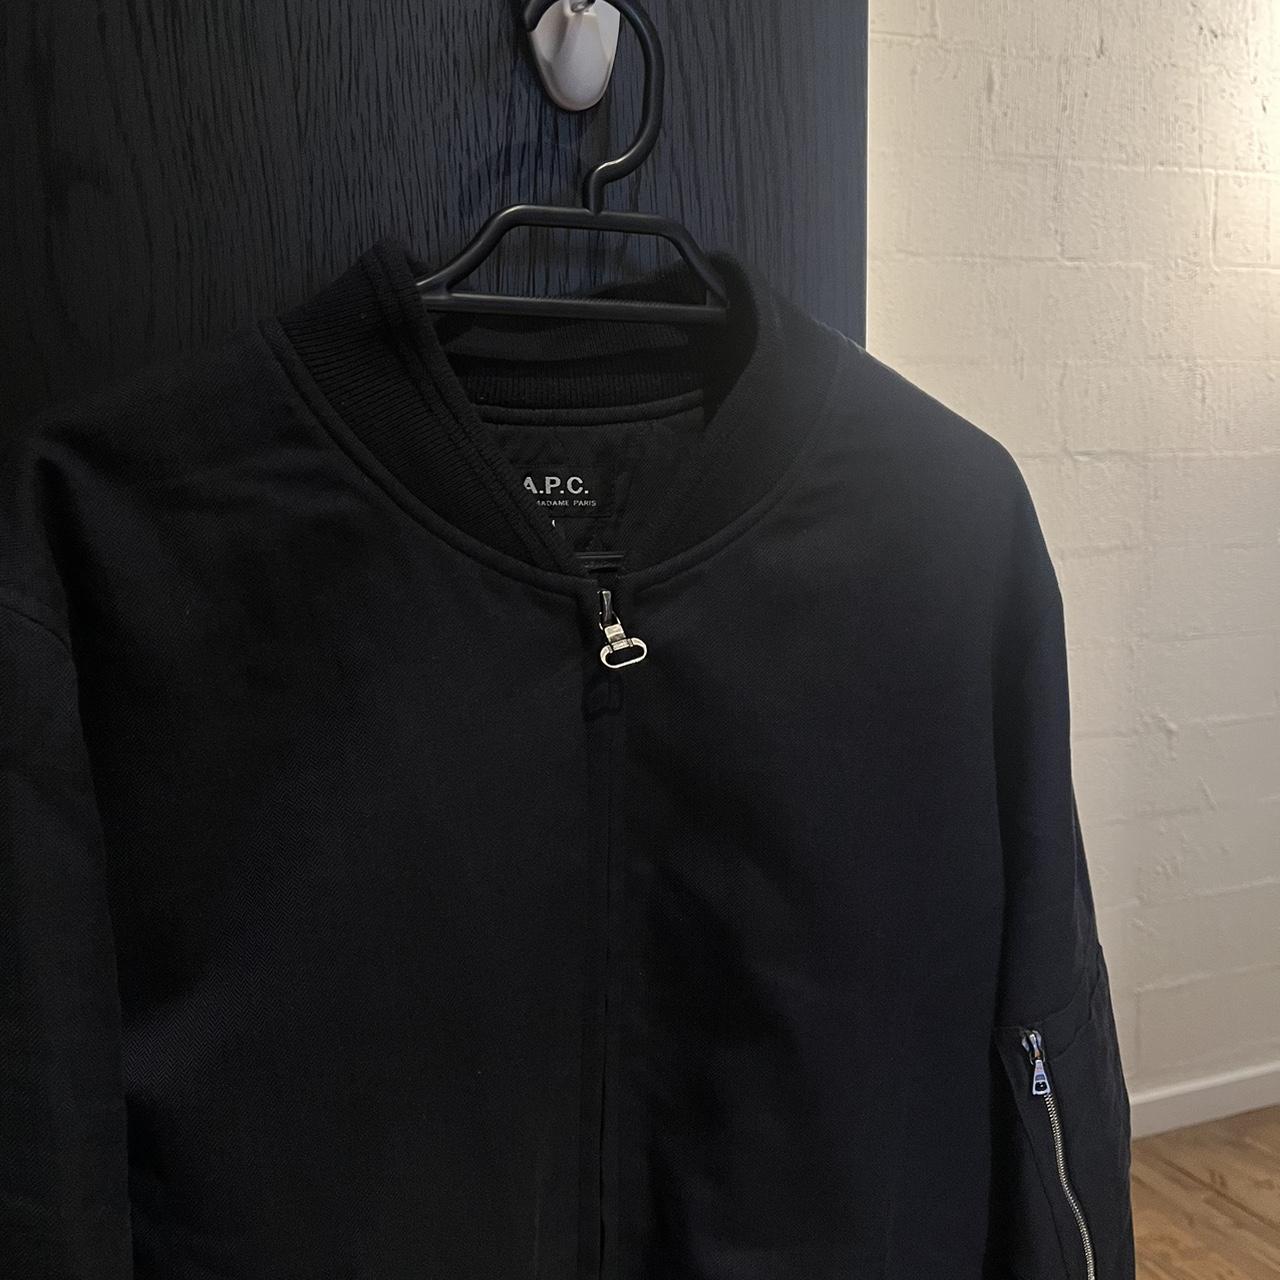 APC bomber jacket #navy with zip and pockets.... - Depop